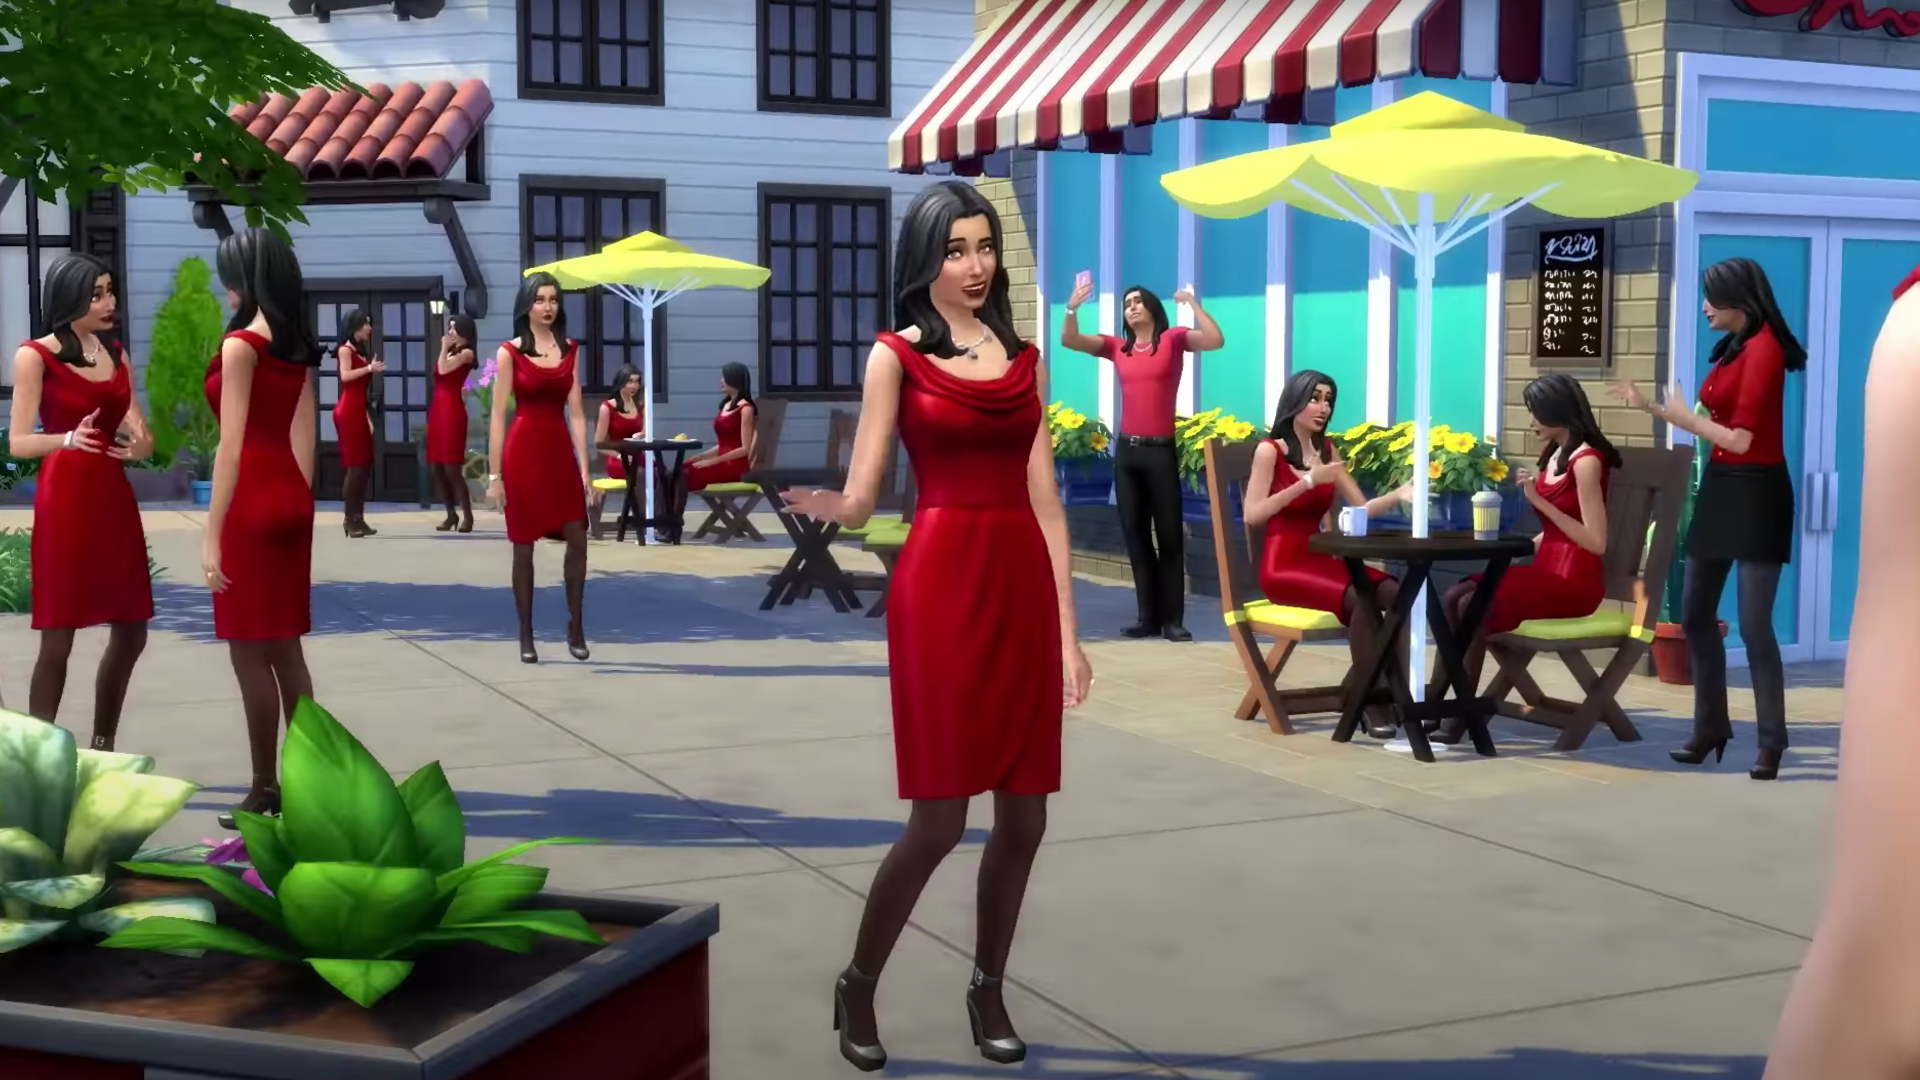 The Sims 4 beginner's guide - Polygon